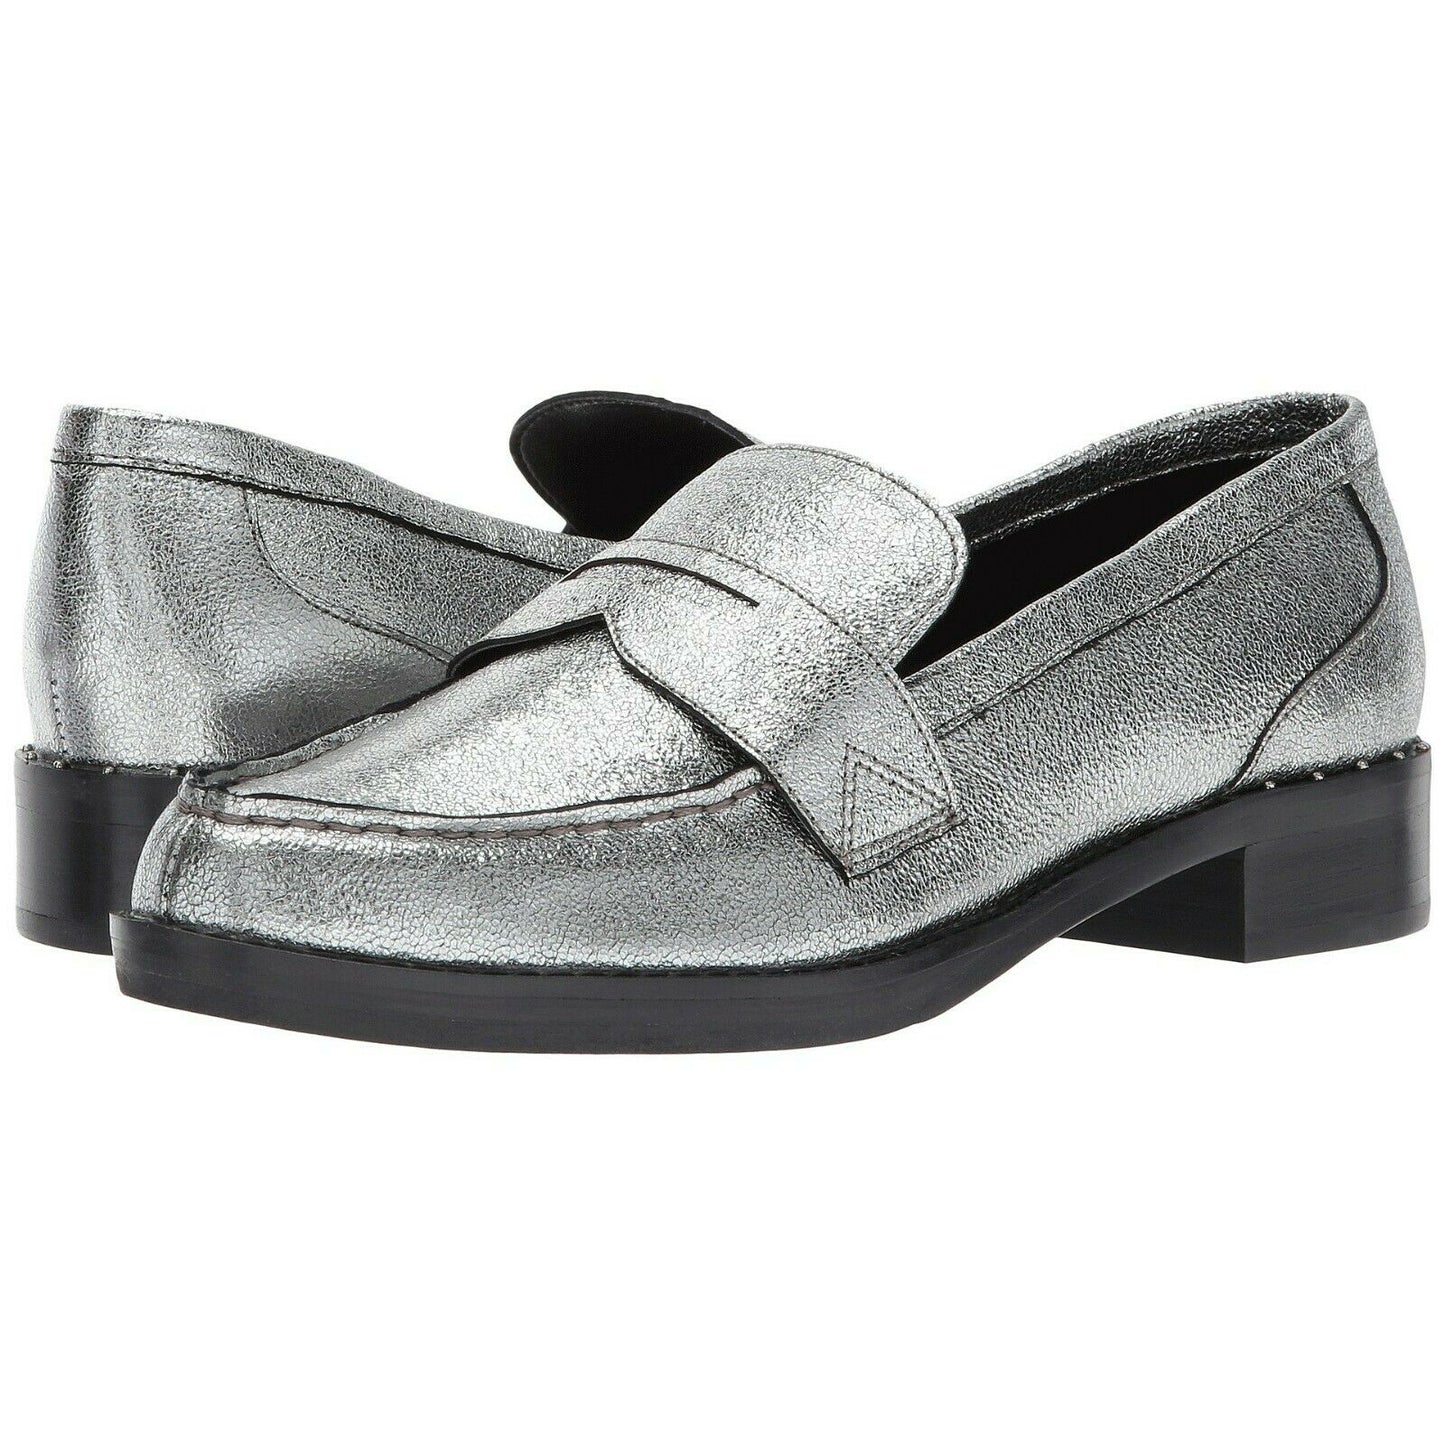 Mark Fisher Vero Pewter Silver Leather Oxford Loafer Size 6.5